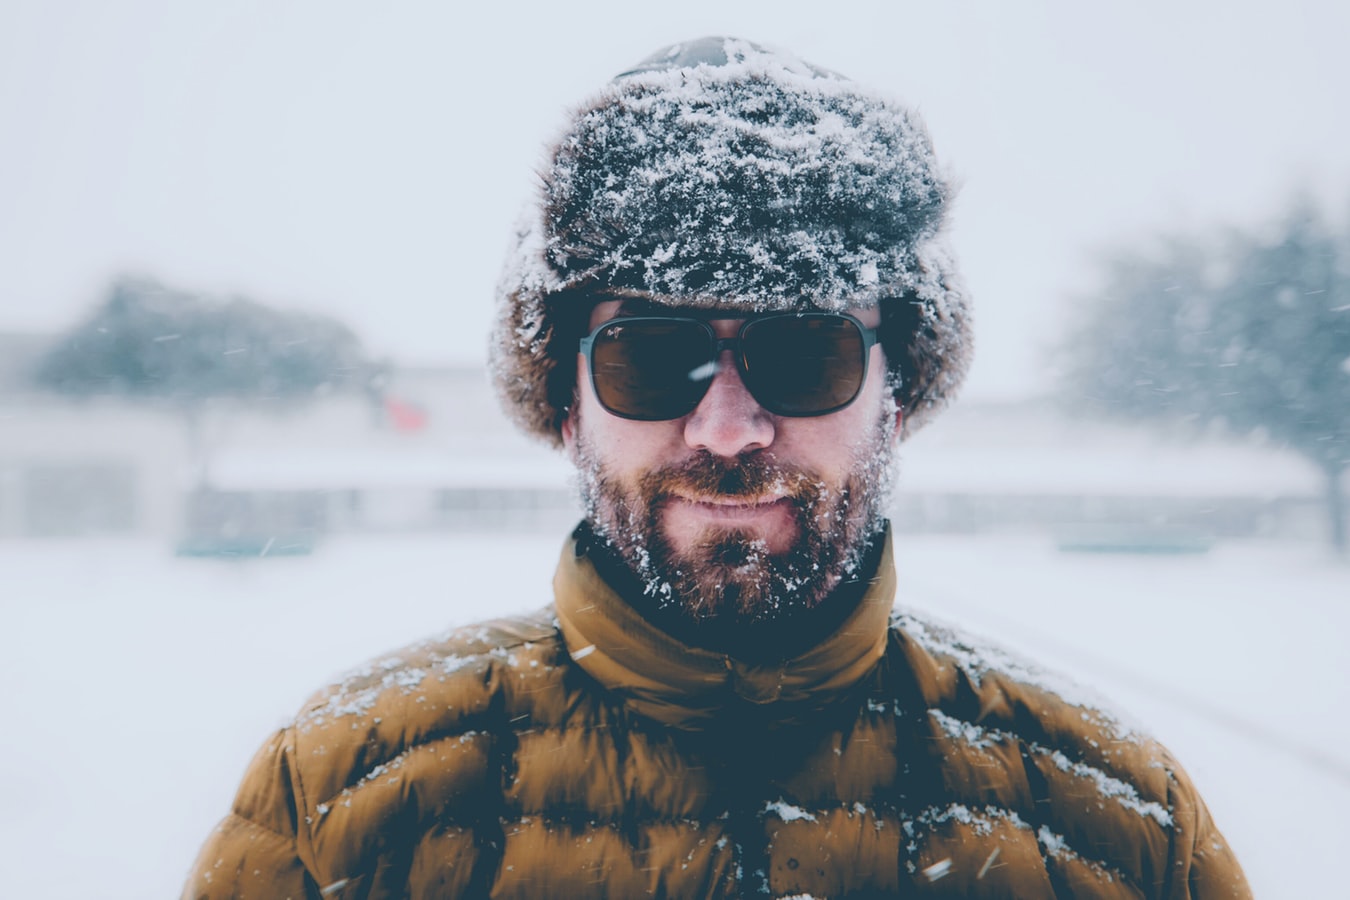 The Top 5 Sunglasses for the Snow | SportRx